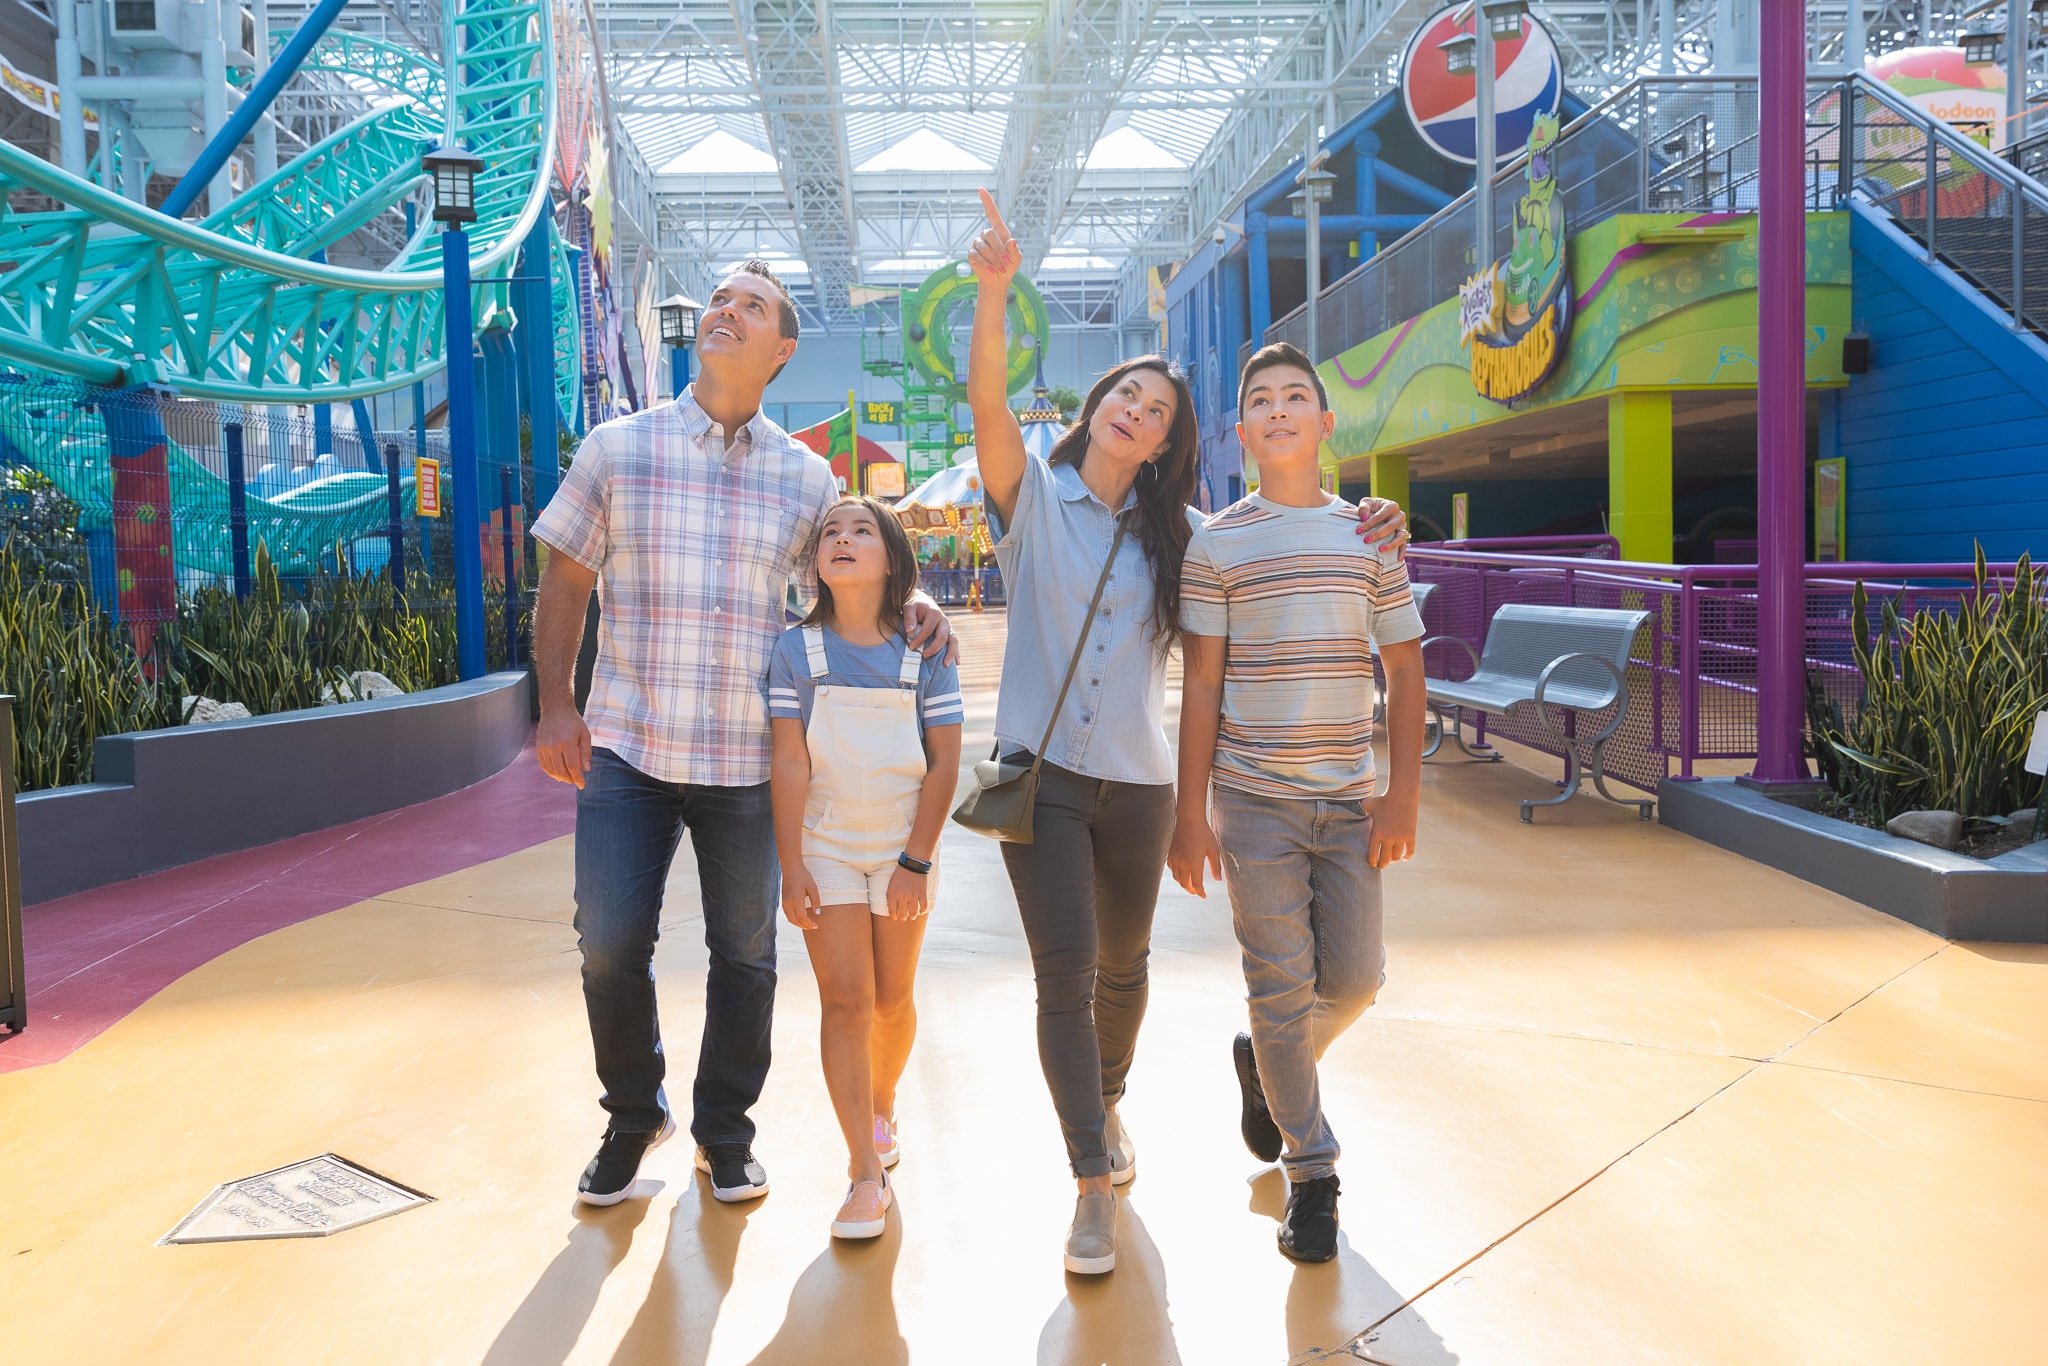 5 Things to know about Mall of America - Hobbies on a Budget